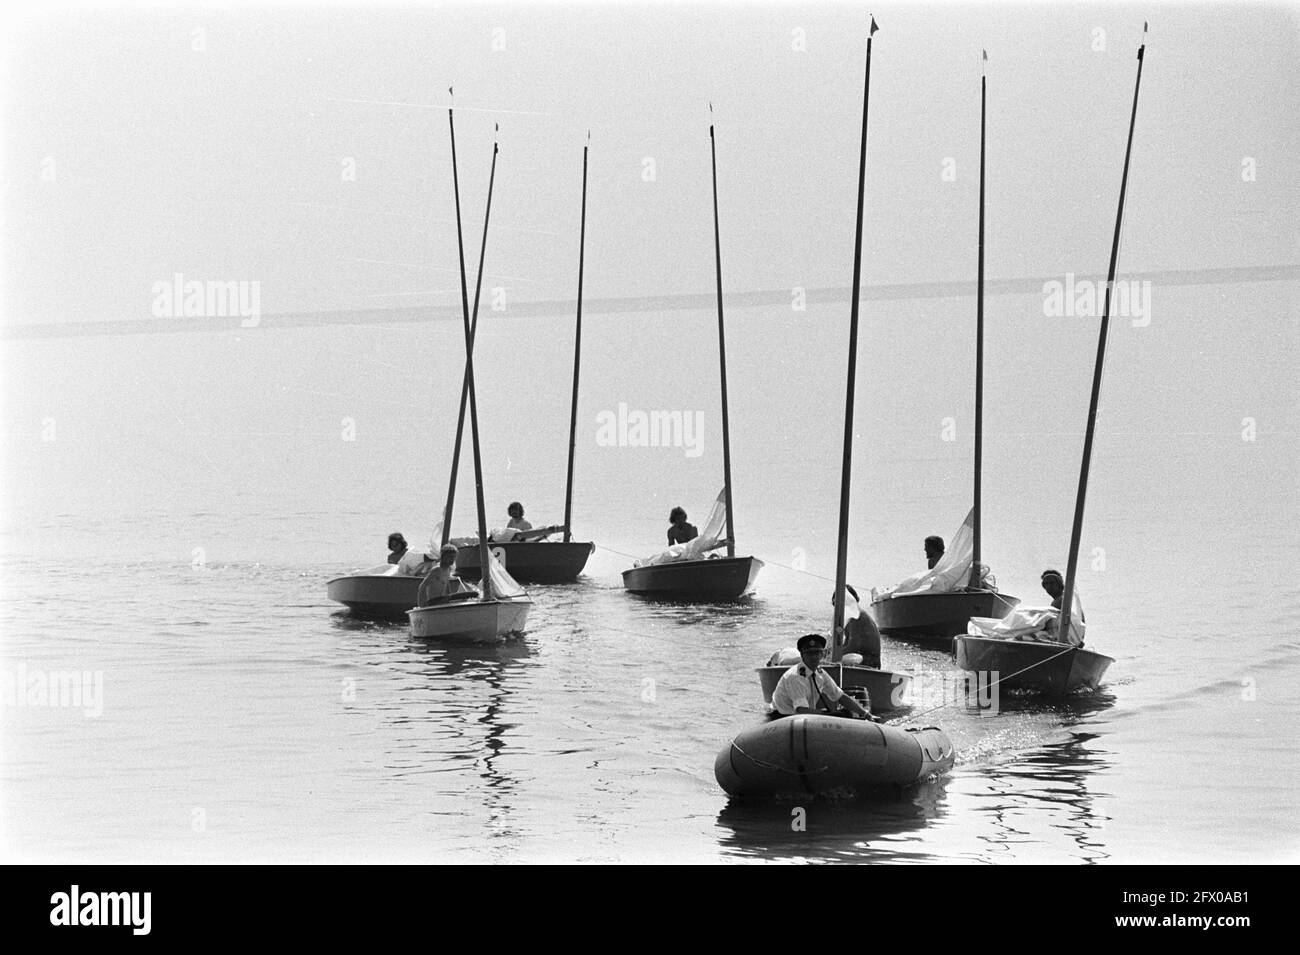 European Championships OK-jollies on the IJsselmeer; boats are towed back because of too little wind, July 31, 1970, CHAMPIONSHIPS, boats, The Netherlands, 20th century press agency photo, news to remember, documentary, historic photography 1945-1990, visual stories, human history of the Twentieth Century, capturing moments in time Stock Photo